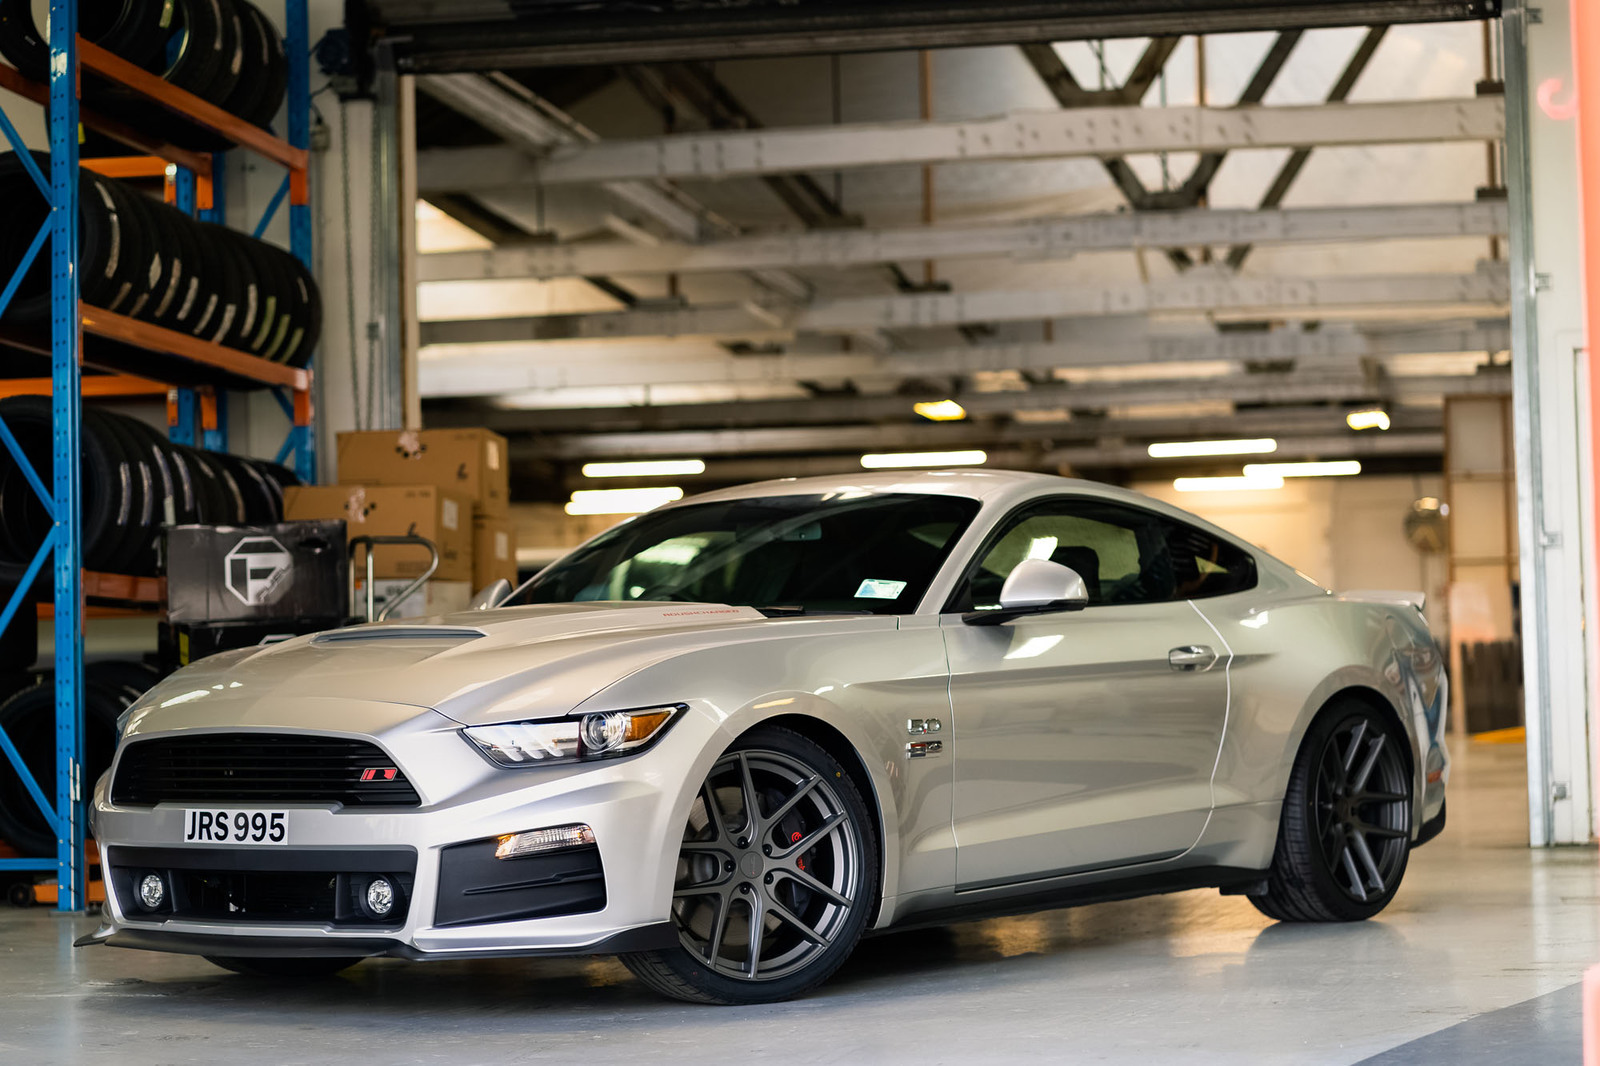 550%20Mustang%20GT%20on%20TSW%20Geneva%20rotary%20forged%20staggered%20concave%20wheels%20-%2074.jpg